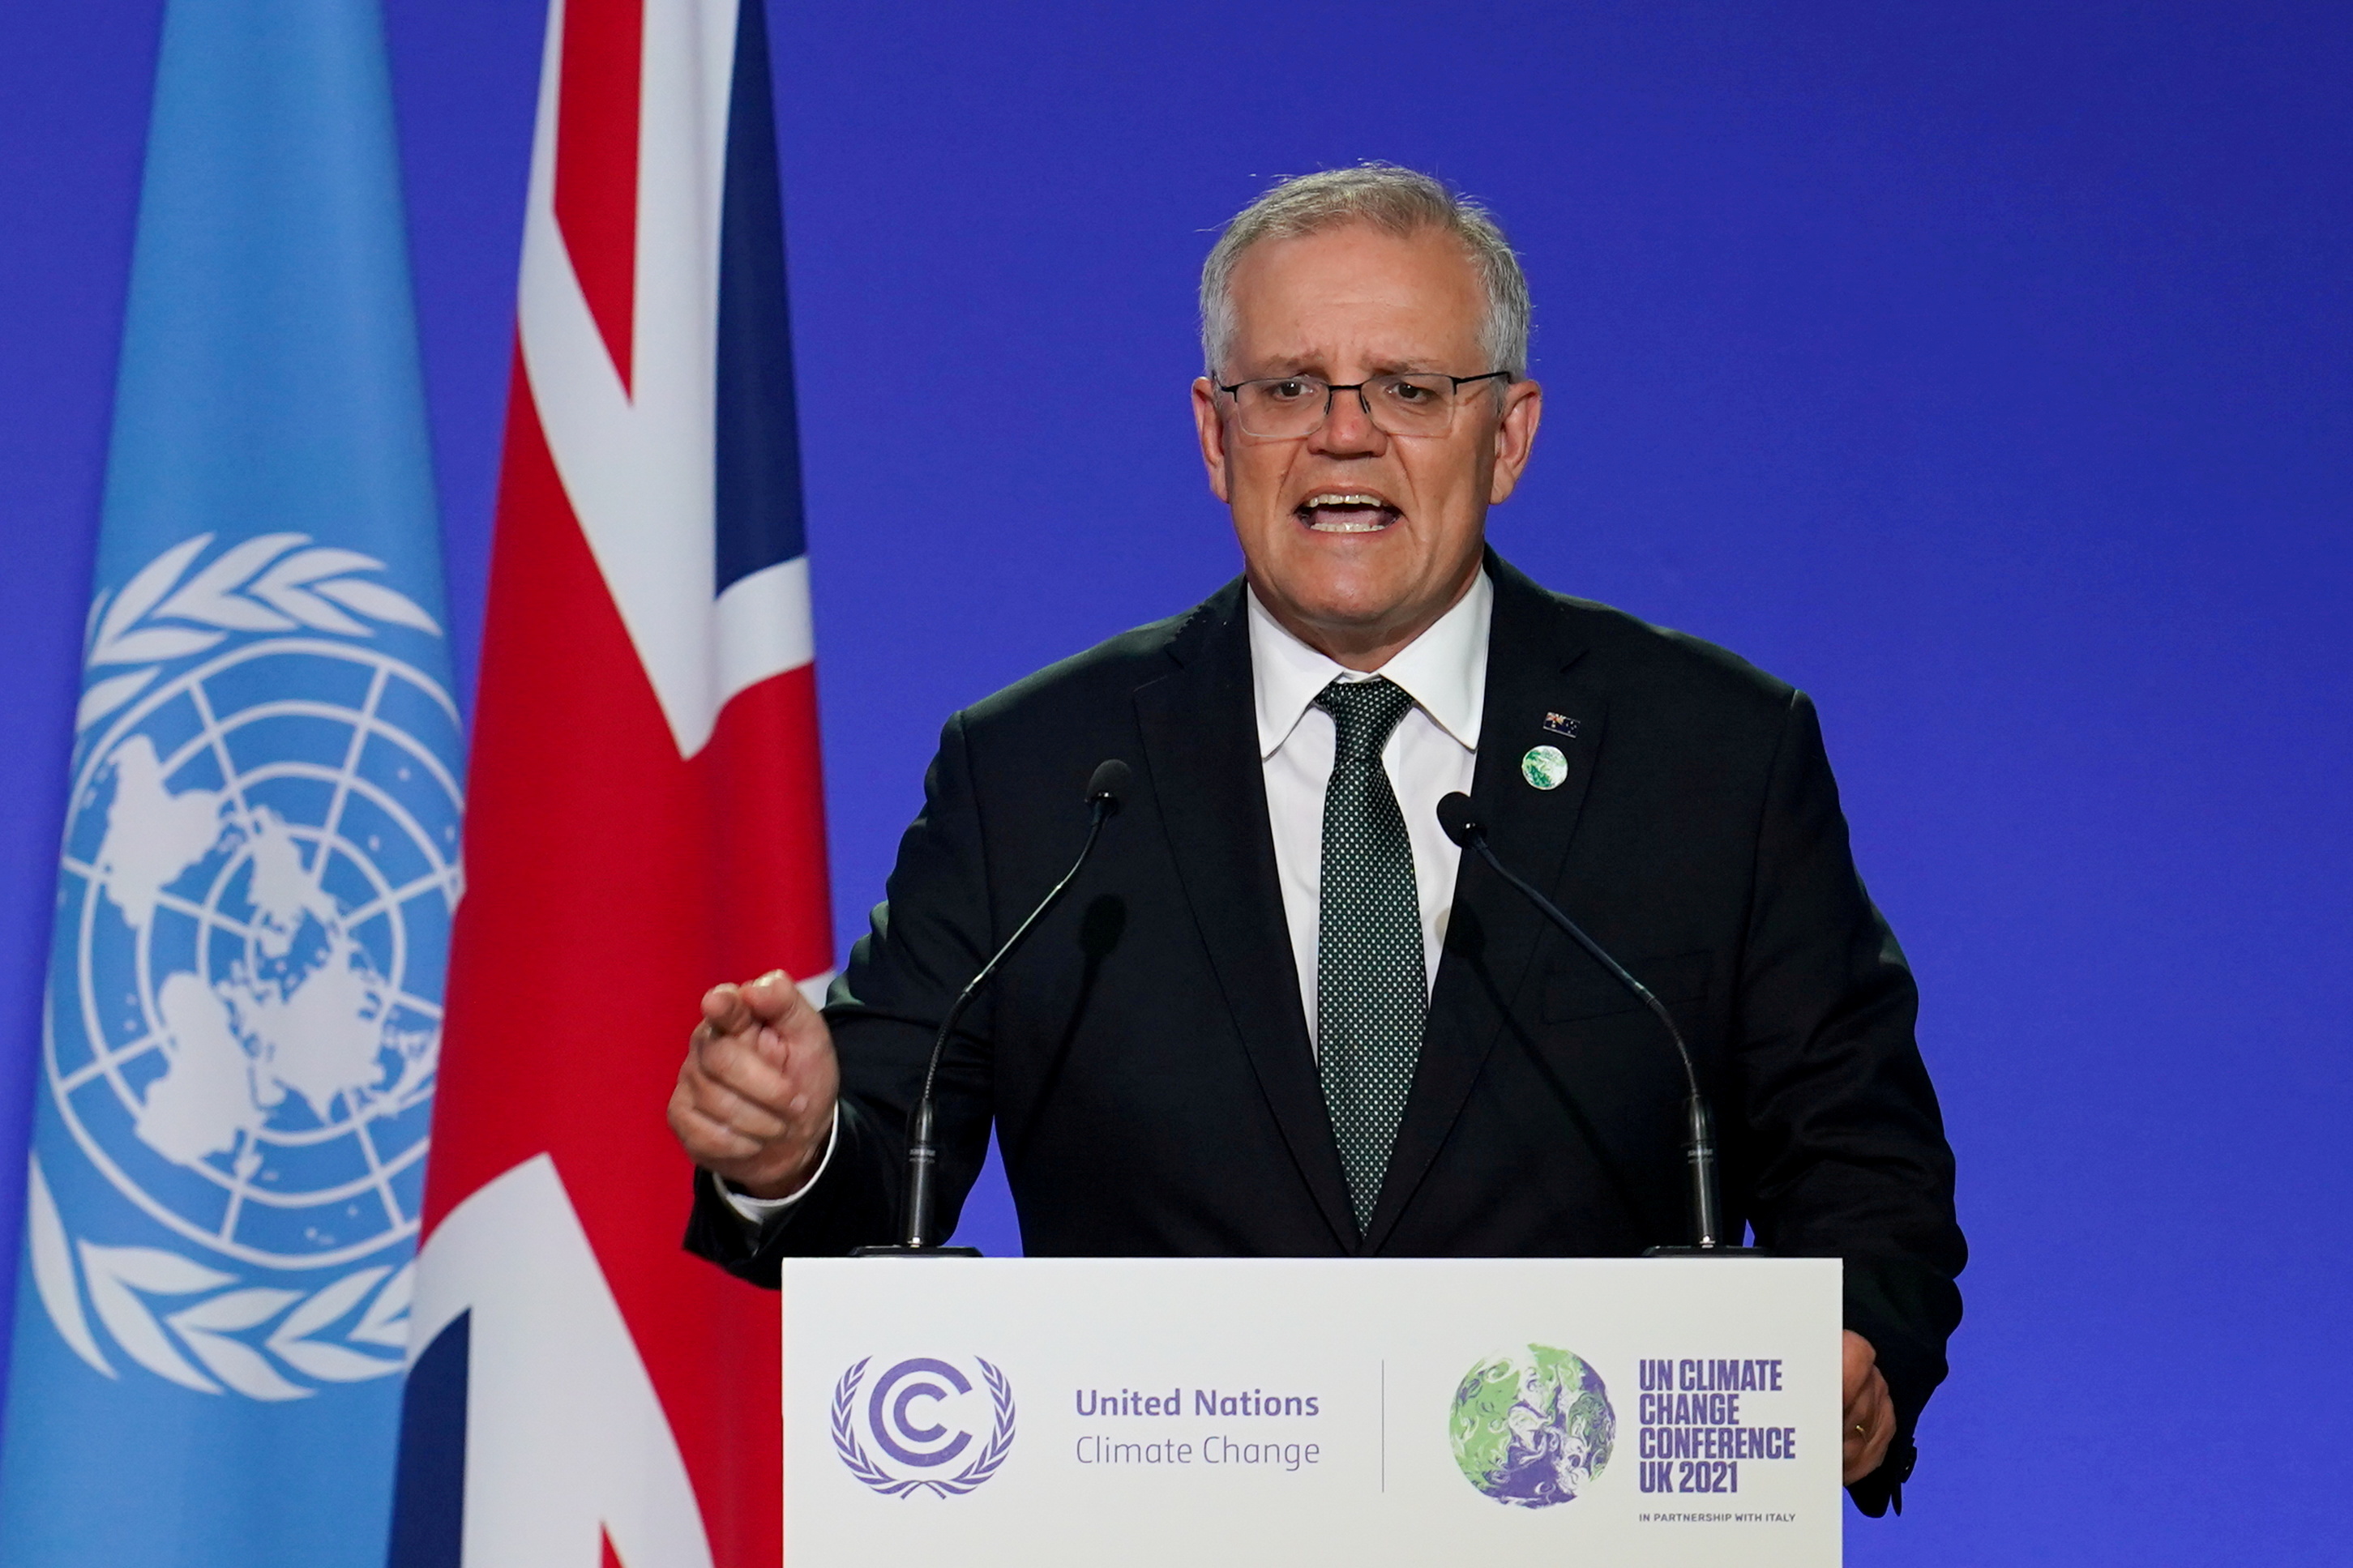 FILE PHOTO: Australia's Prime Minister Scott Morrison speaks as National Statements are delivered as a part of the World Leaders' Summit at the UN Climate Change Conference (COP26) in Glasgow, Scotland, Britain November 1, 2021. Ian Forsyth/Pool via REUTERS/File Photo